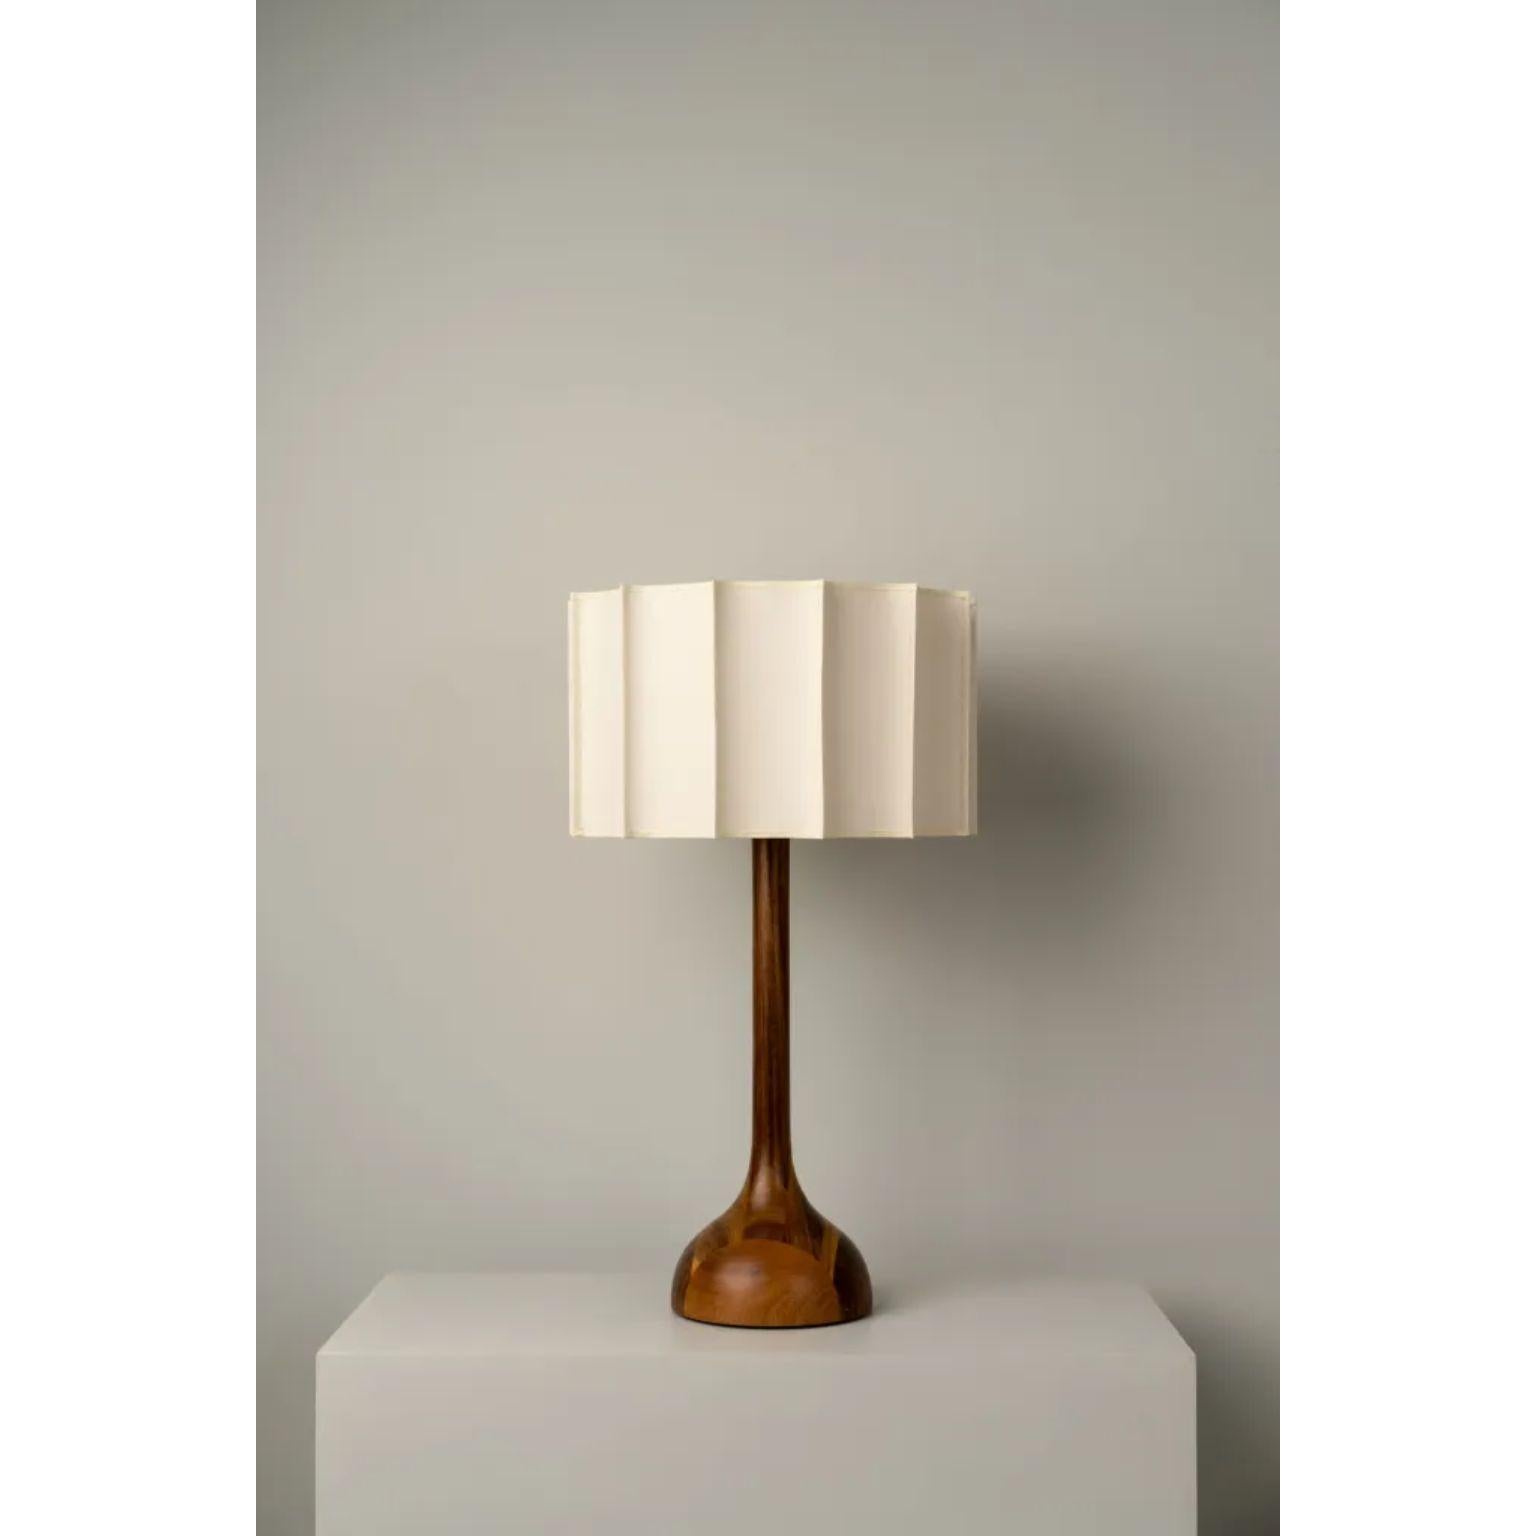 Pata De Elefante Medium Table Lamp by Isabel Moncada
Dimensions: Ø 53.5 x H 91 cm.
Materials: Turned parota wood base and fabric-lined lampshade with fiberglass and polystyrene.

Named Pata de Elefante –Elephant‘s Foot– for the prominent shape at